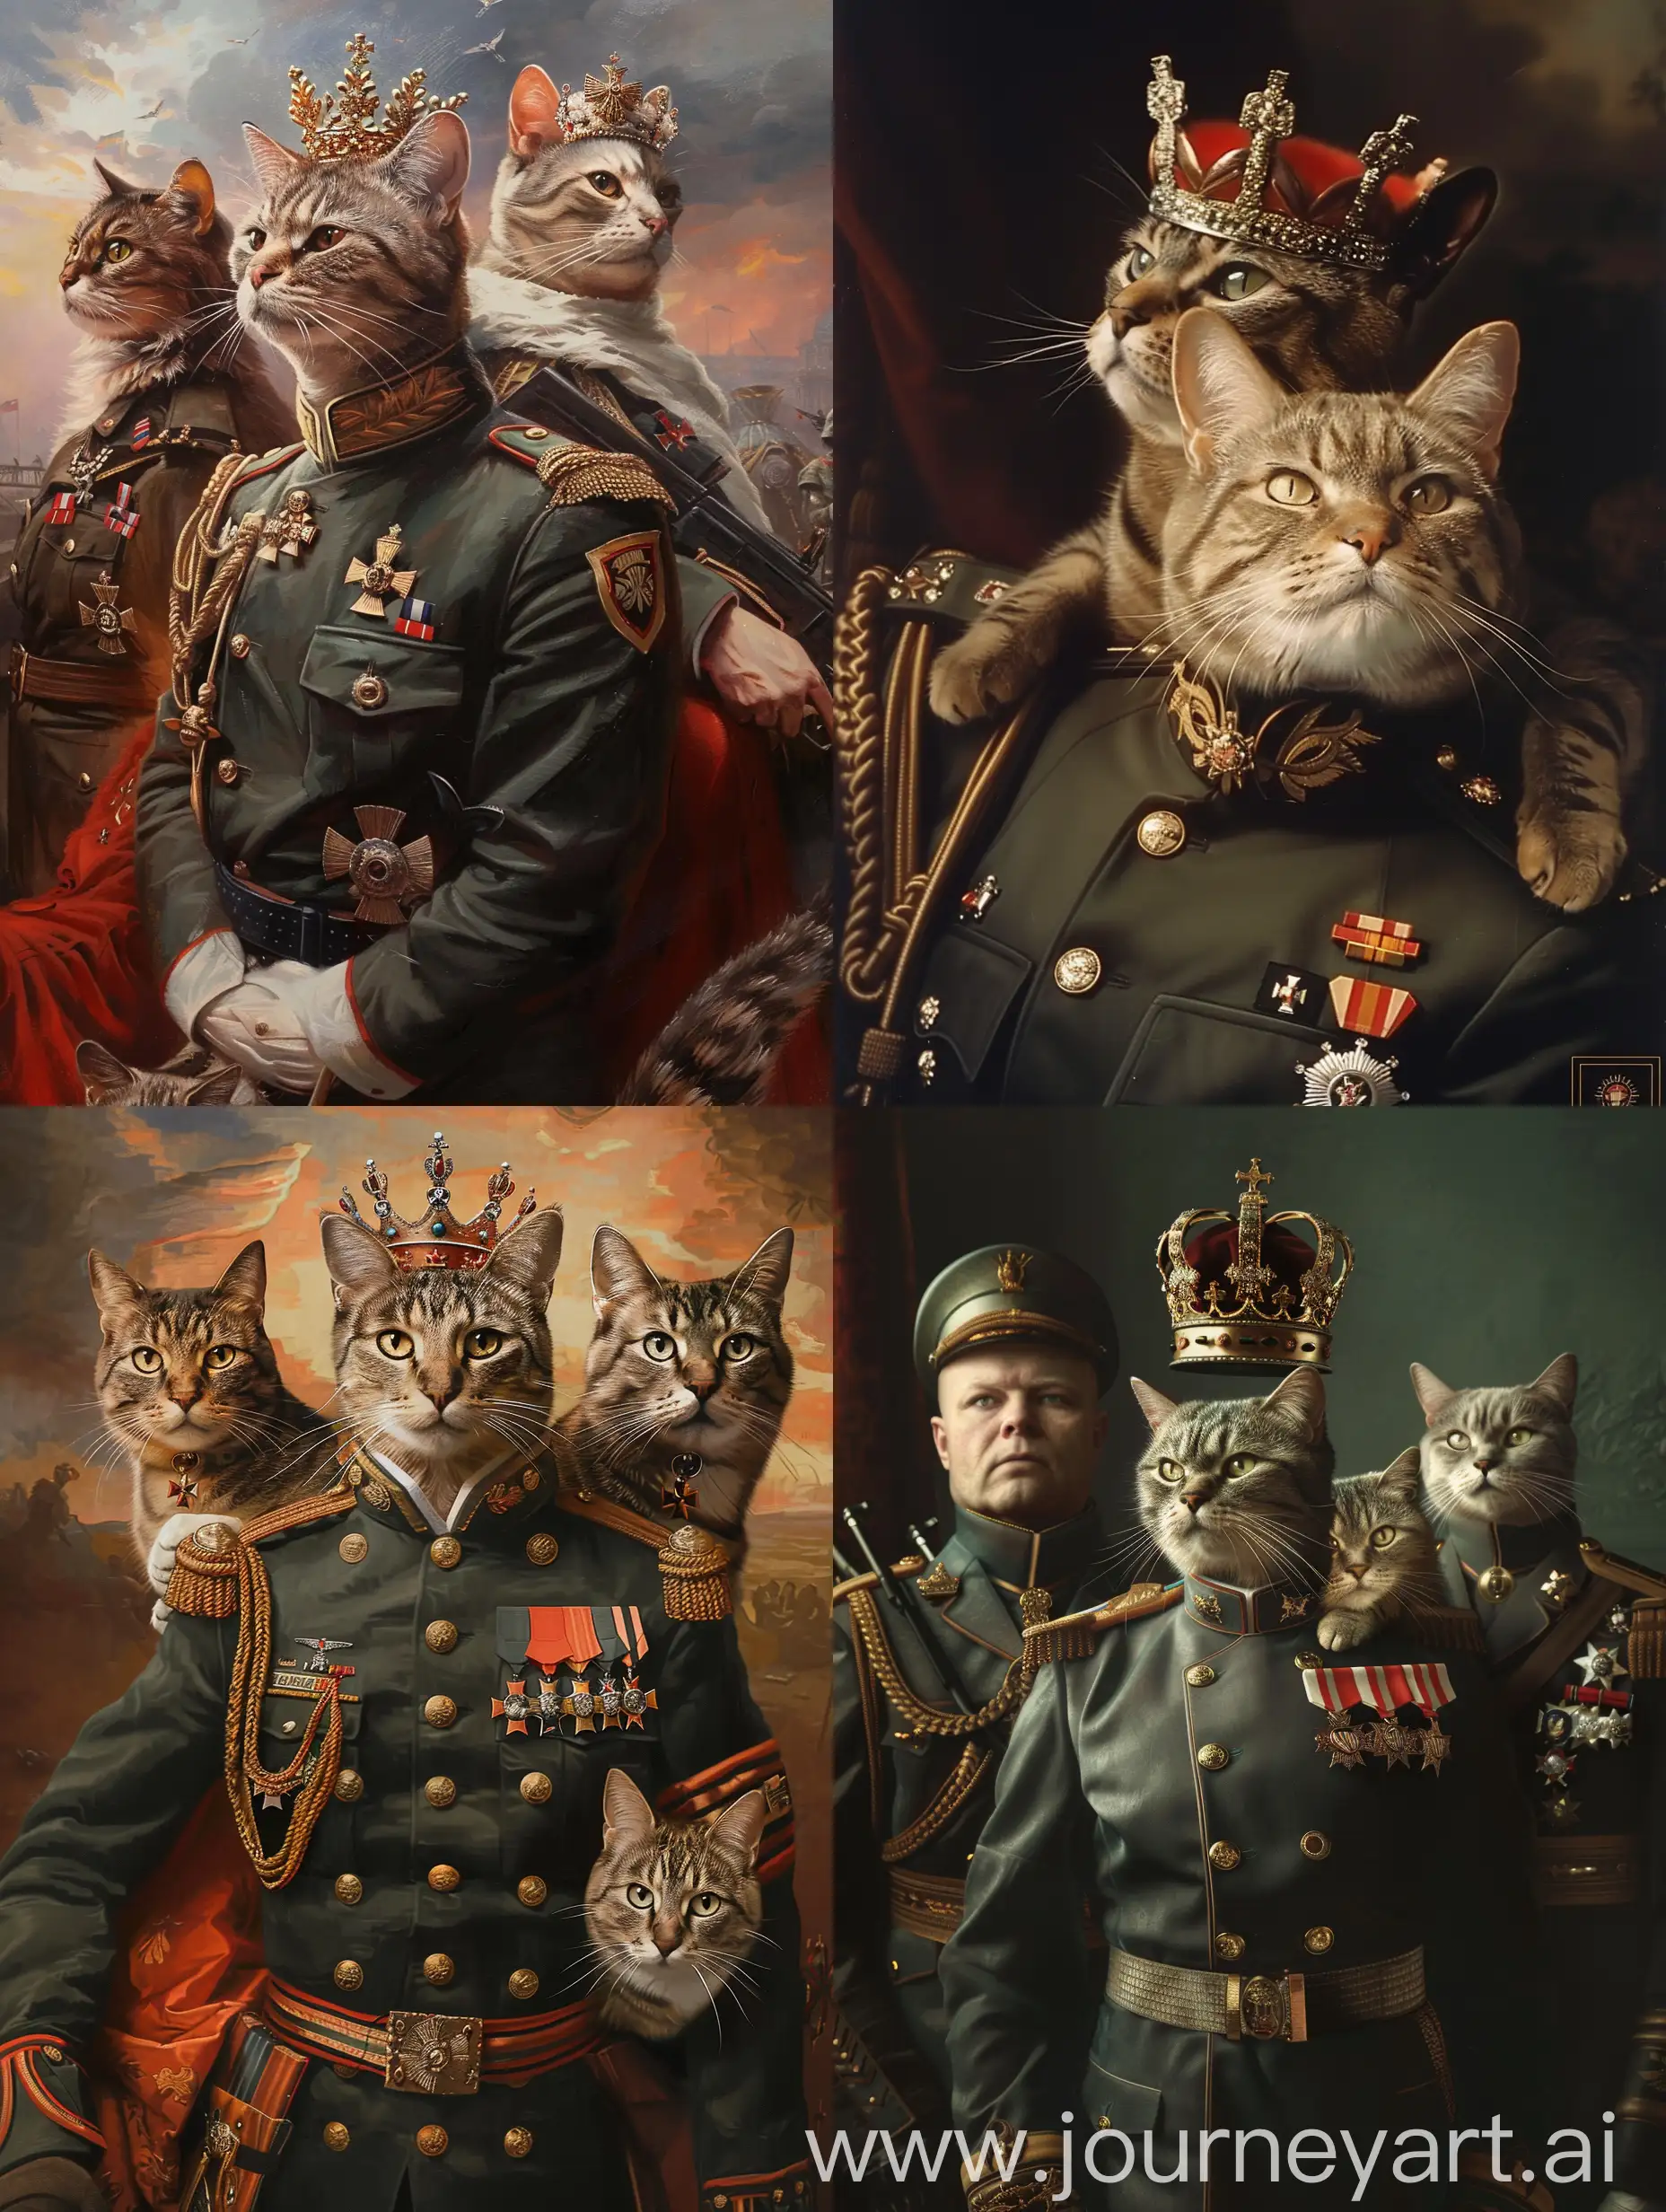 A picture of cat wearing a crown a military model on his shoulder  a military uniform  and a full military uniform